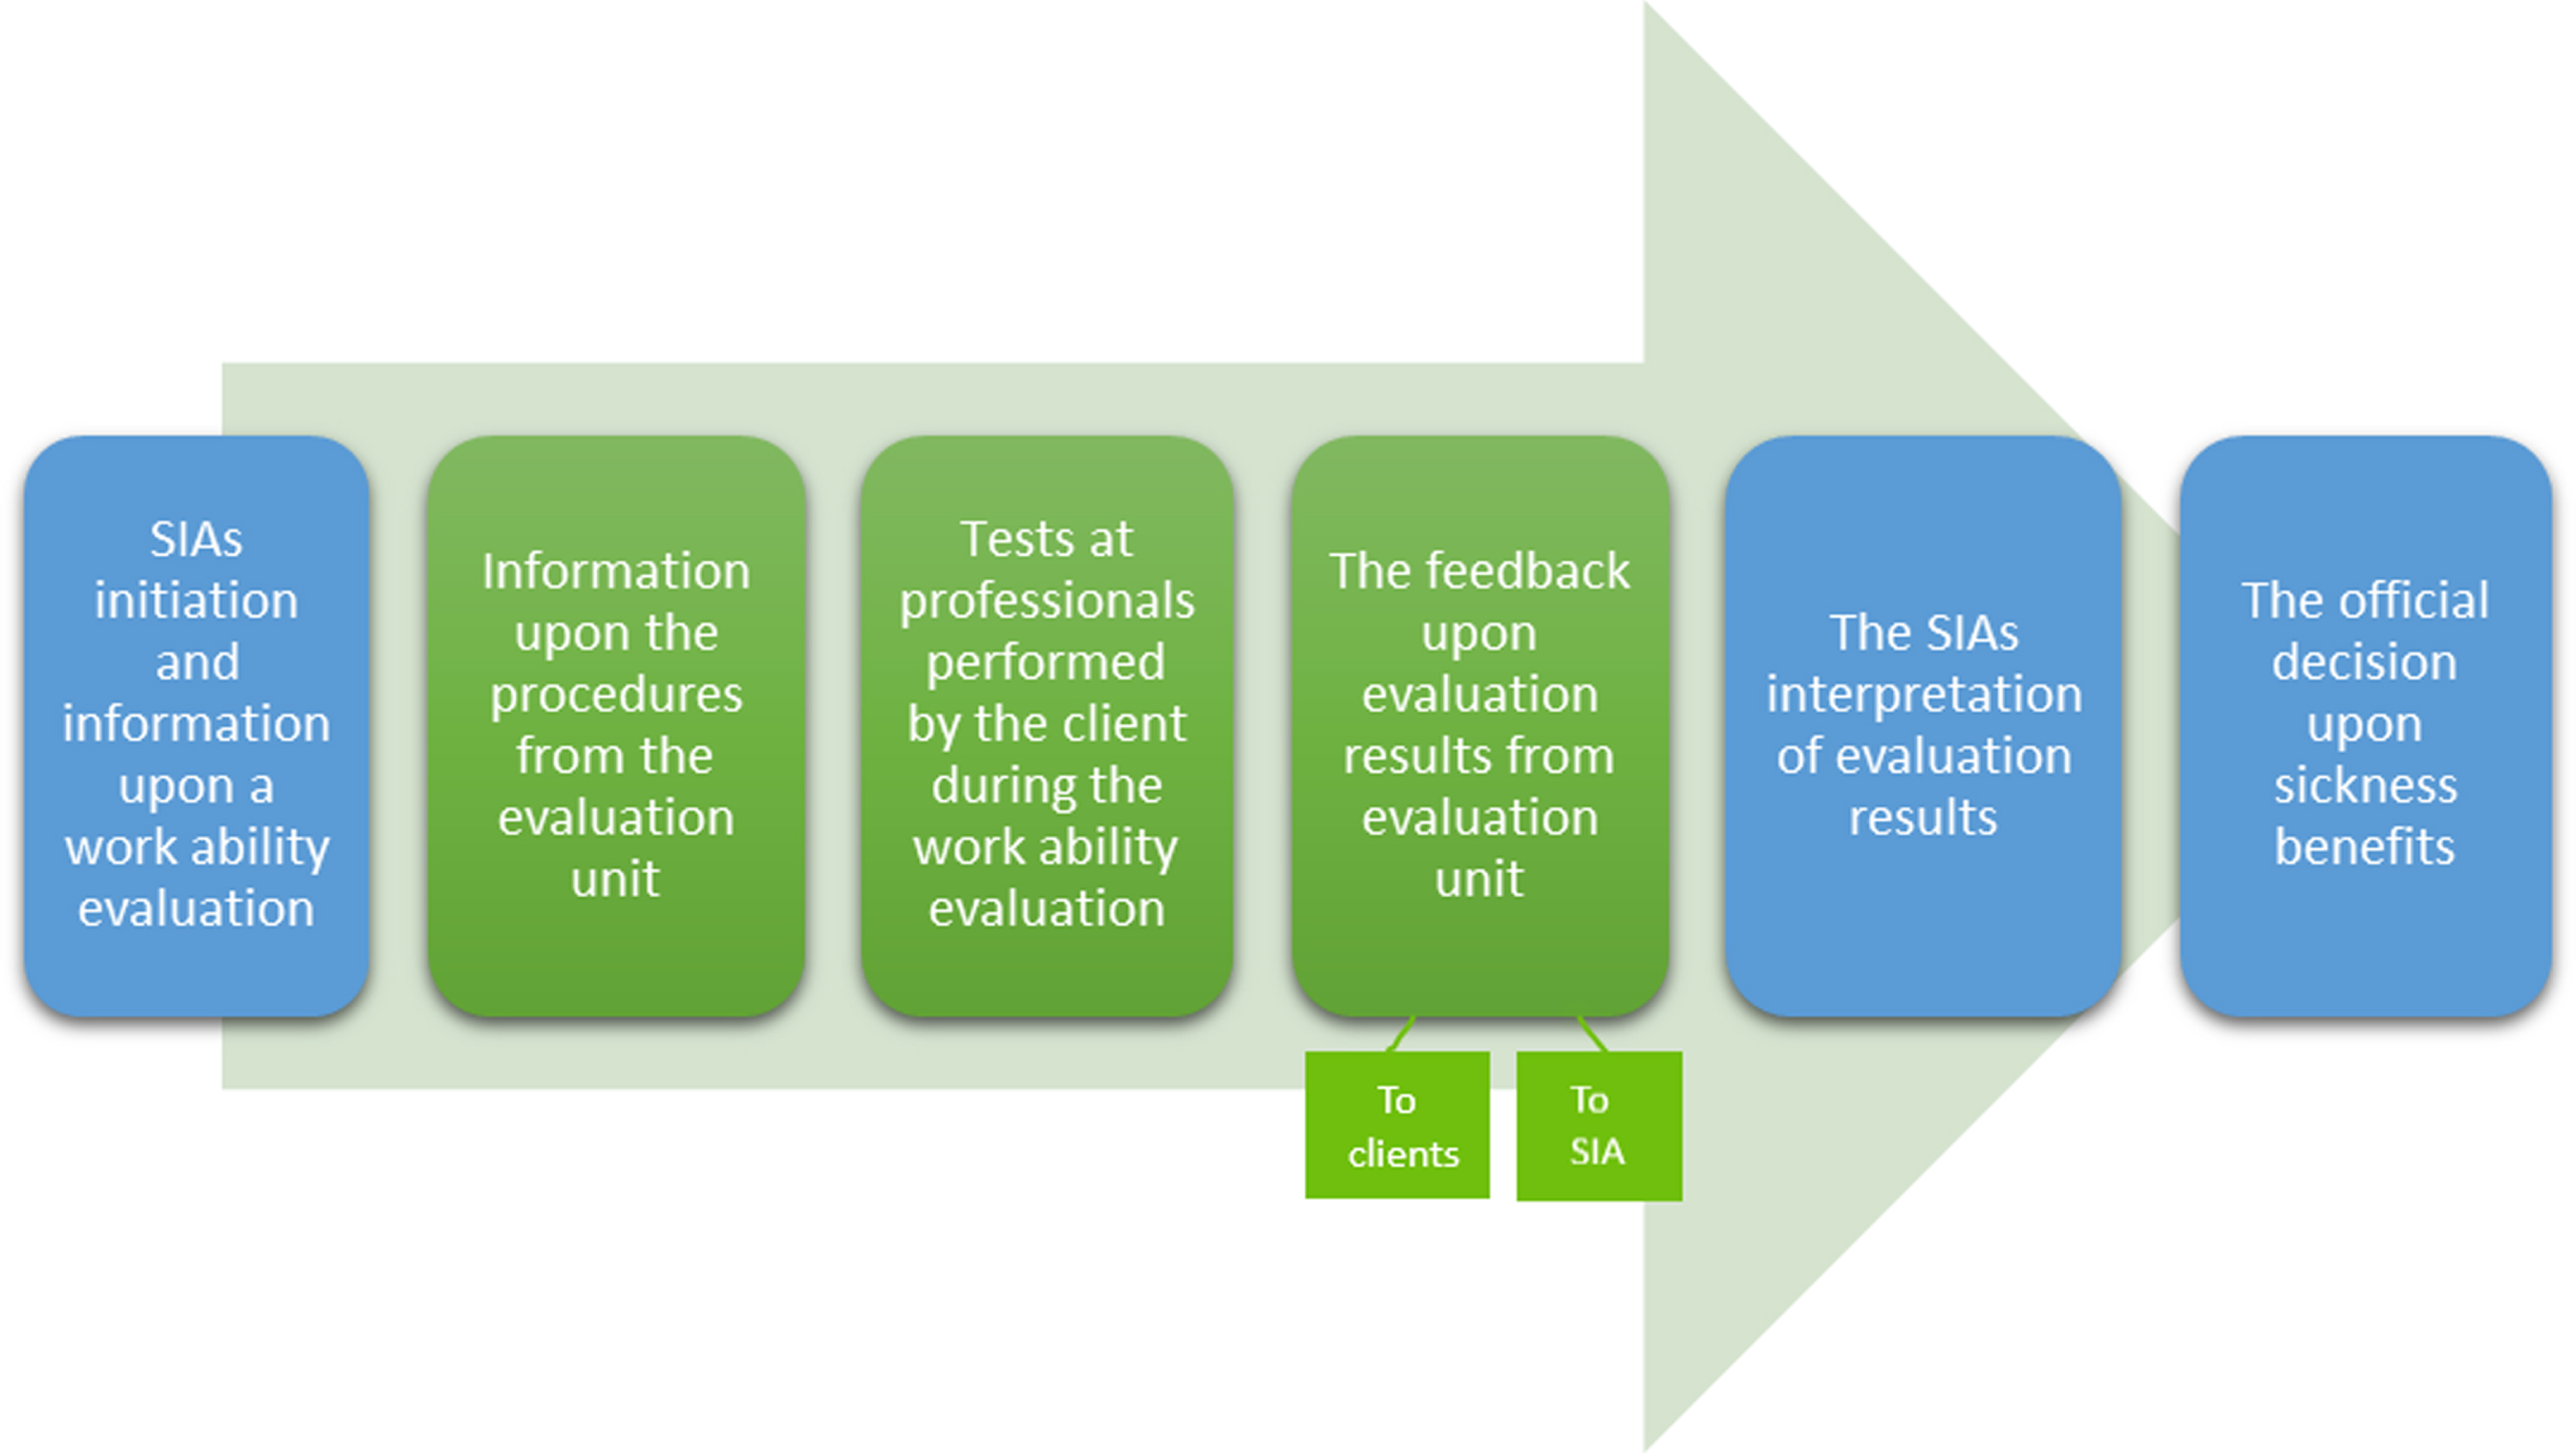 The process of work ability evaluations and official decisions shared by the SIA (blue) and evaluation units (green).